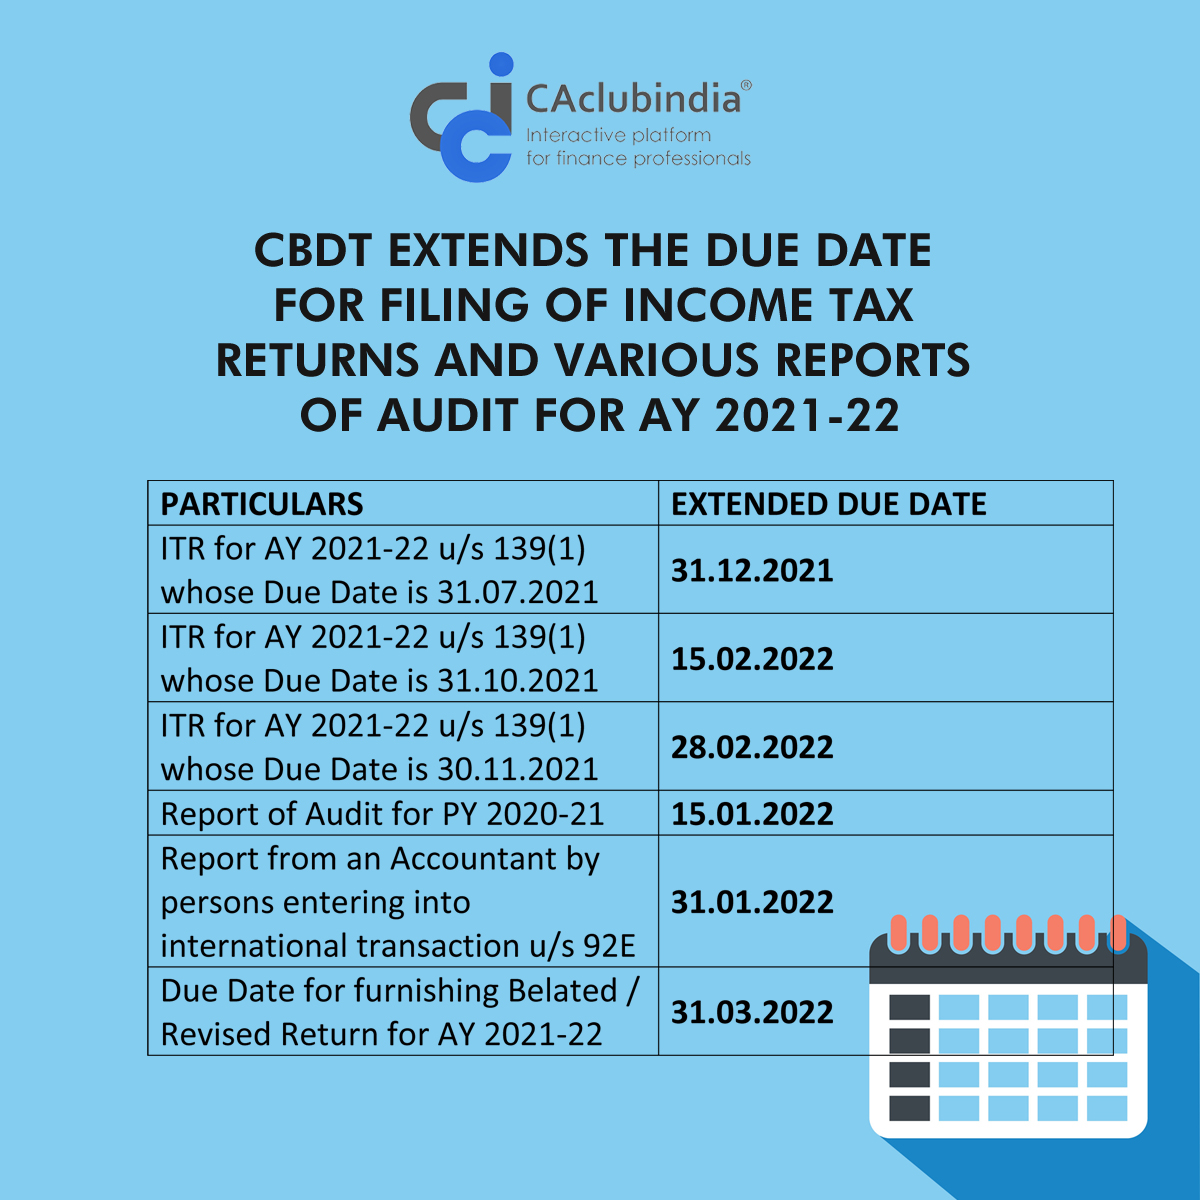 CBDT extends the due date for filing of Income Tax Returns and Various Reports of Audit for AY 2021-22